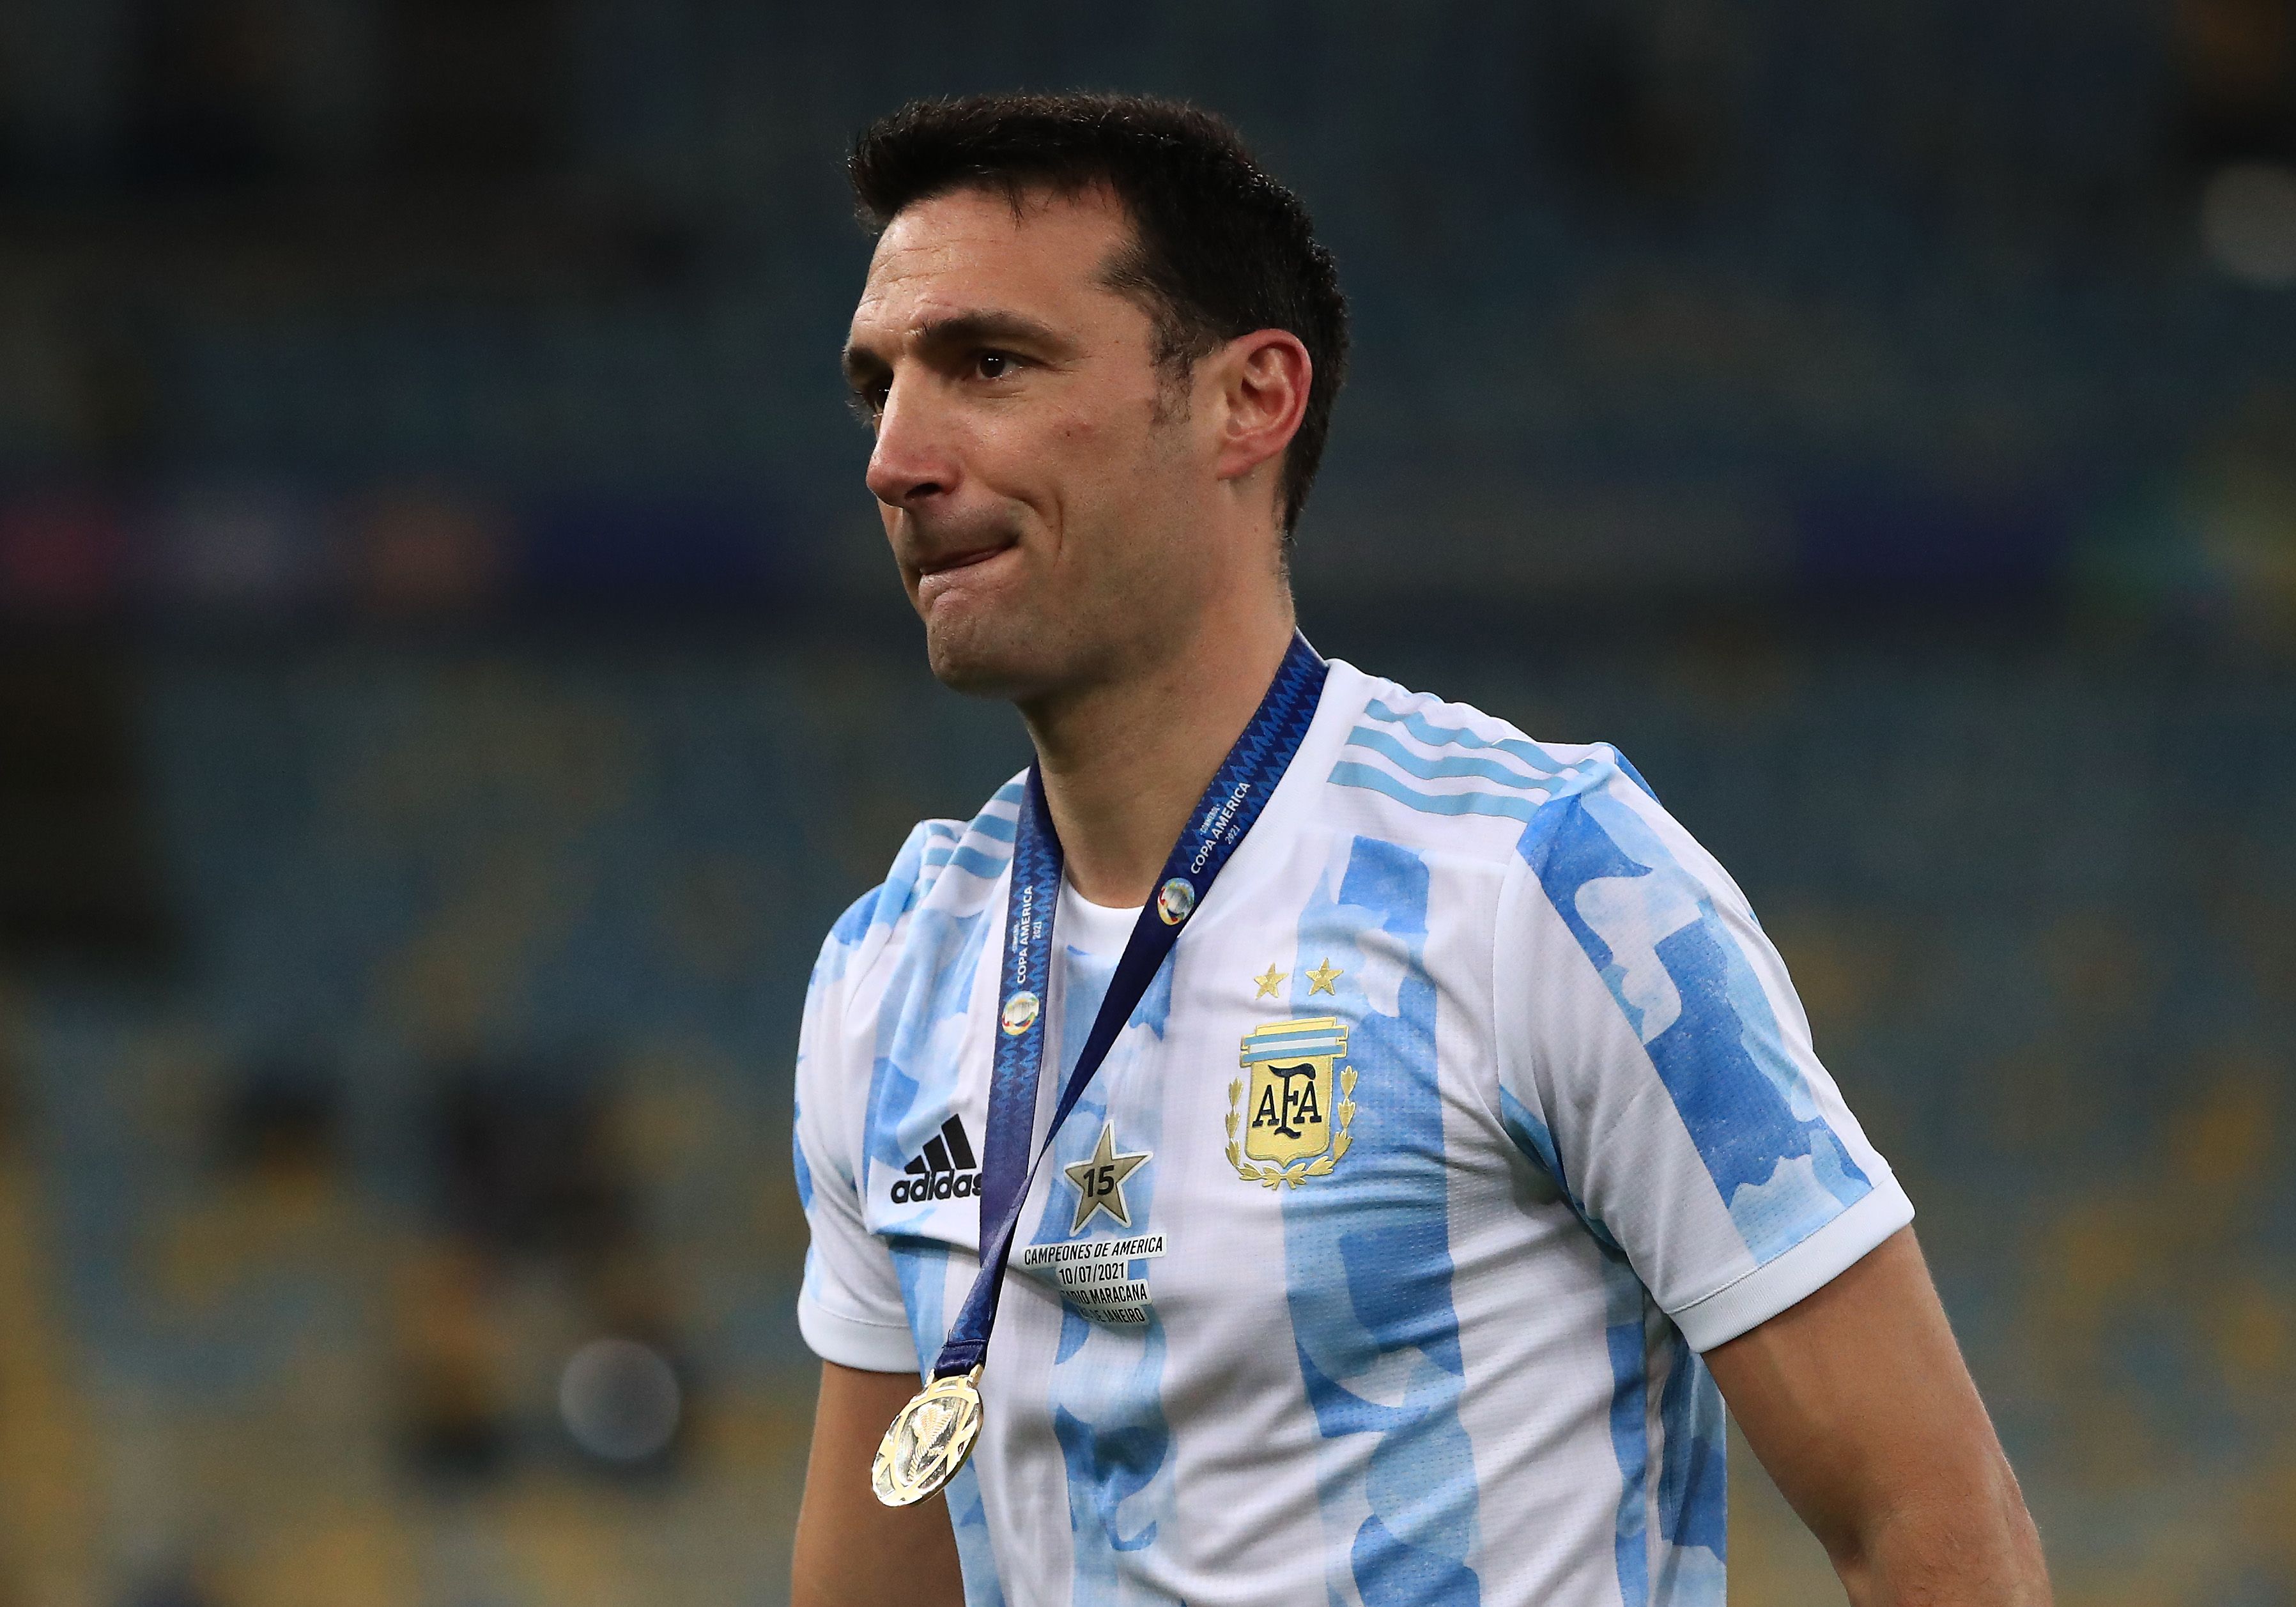 Head coach of Argentina Lionel Scaloni reacts after receiving the championship medal the final of Copa America Brazil 2021 between Brazil and Argentina at Maracana Stadium on July 10, 2021 in Rio de Janeiro, Brazil.